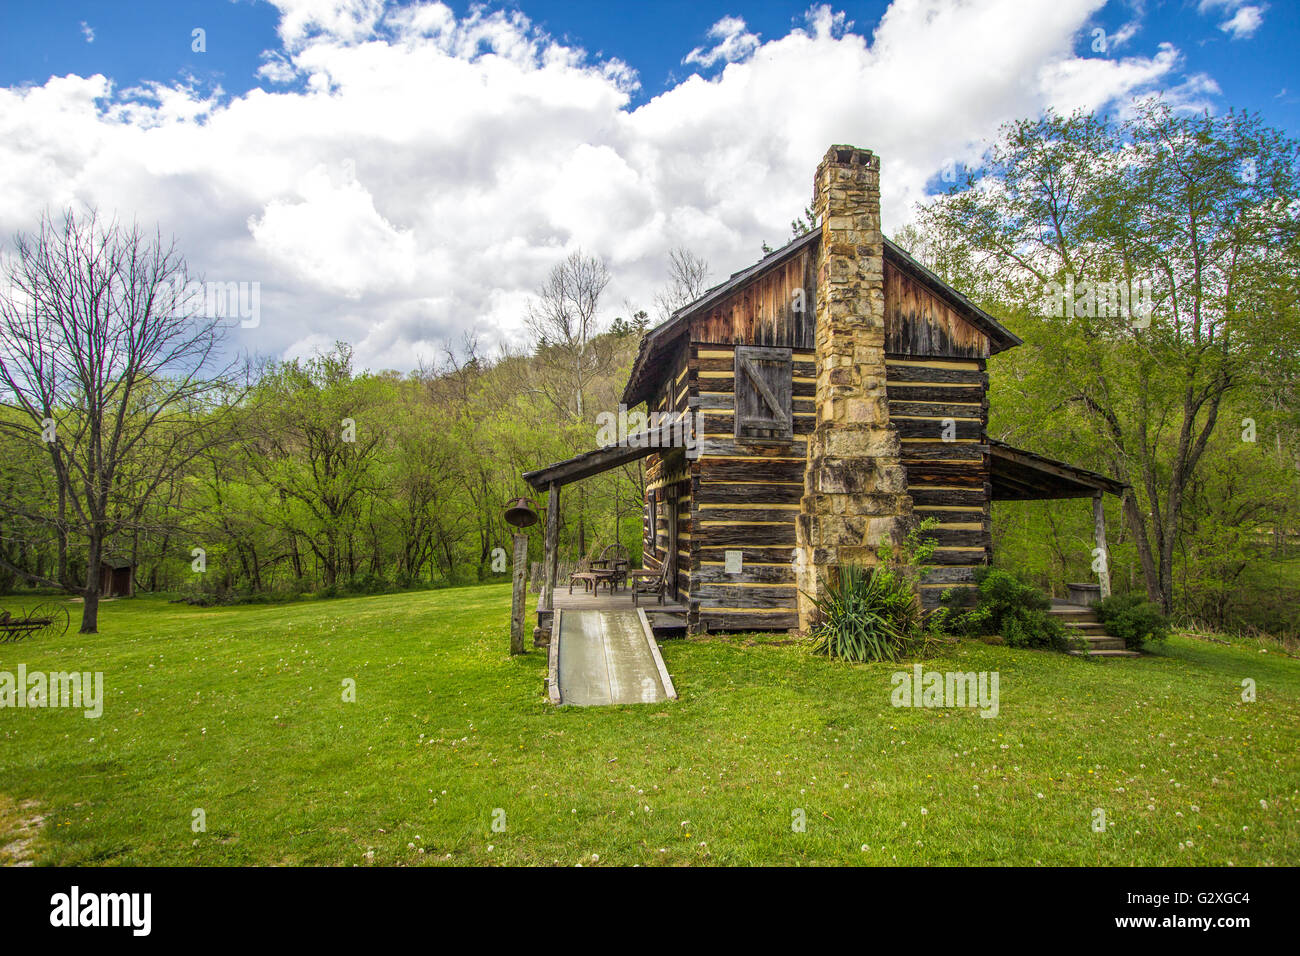 Kentucky Log Cabin. Historical log cabin at the Gladie Visitors Center in Daniel Boone National Forest. Stock Photo